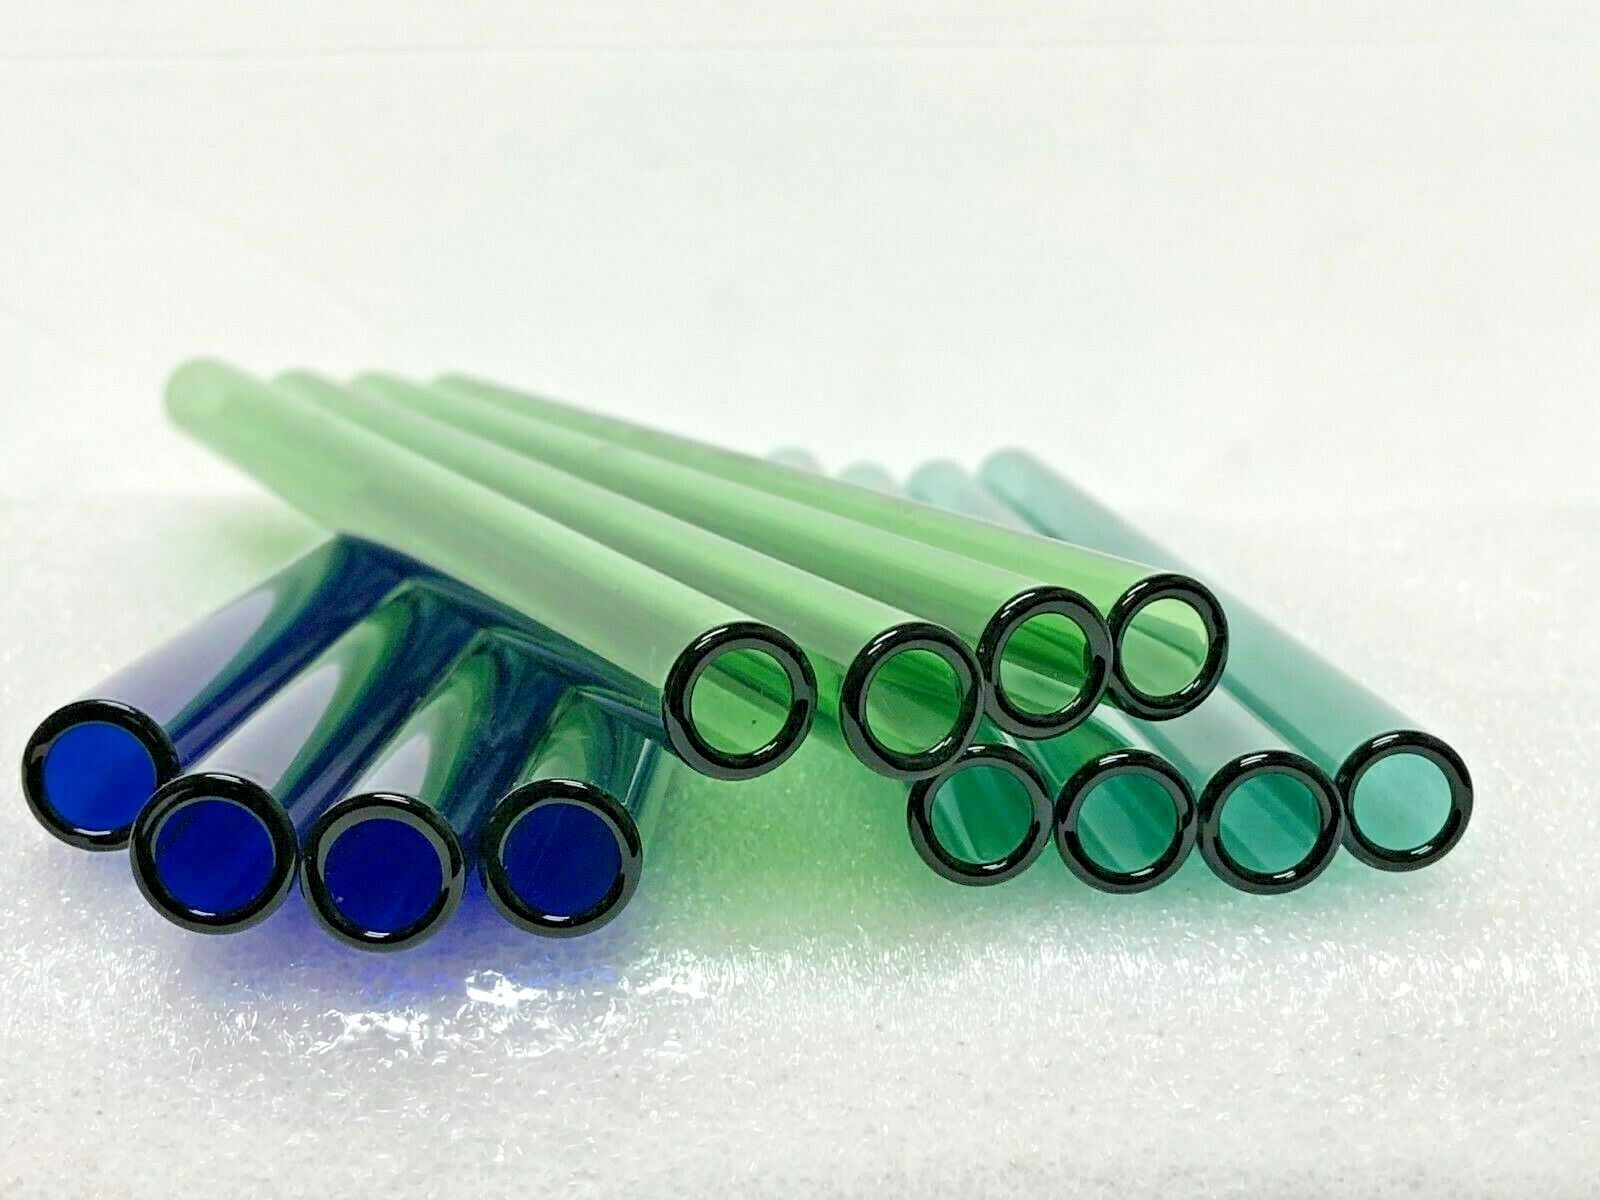 08 Pieces Glass tube Pyrex 12 mm X 2 mm X 12" Long   Blowing tube  ID=8mm  Color Pyrex Does Not Apply - фотография #8